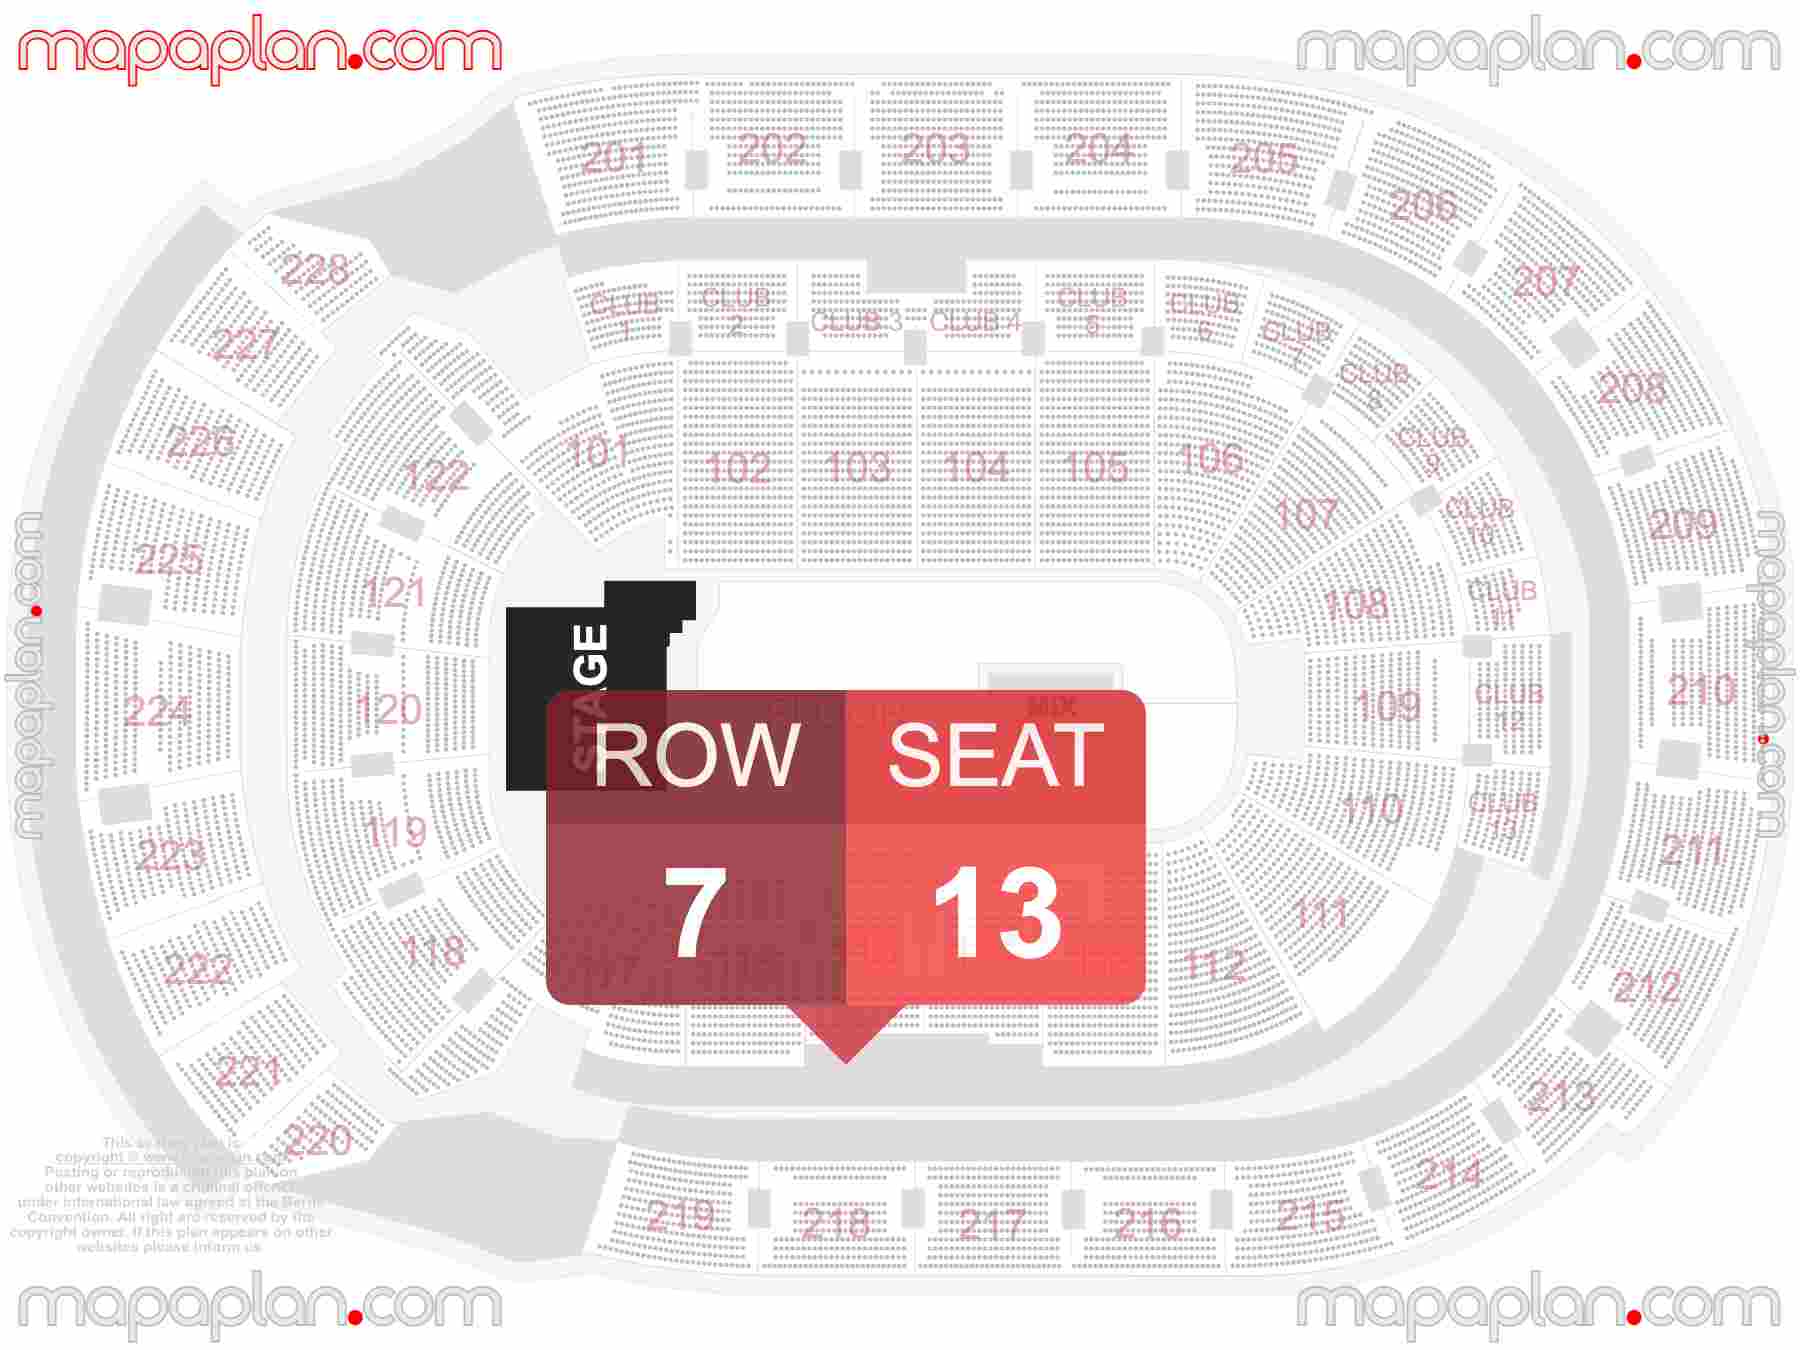 Columbus Nationwide Arena seating chart Concert with floor general admission standing interactive seating checker map plan showing seat numbers per row - Ticket prices sections review diagram